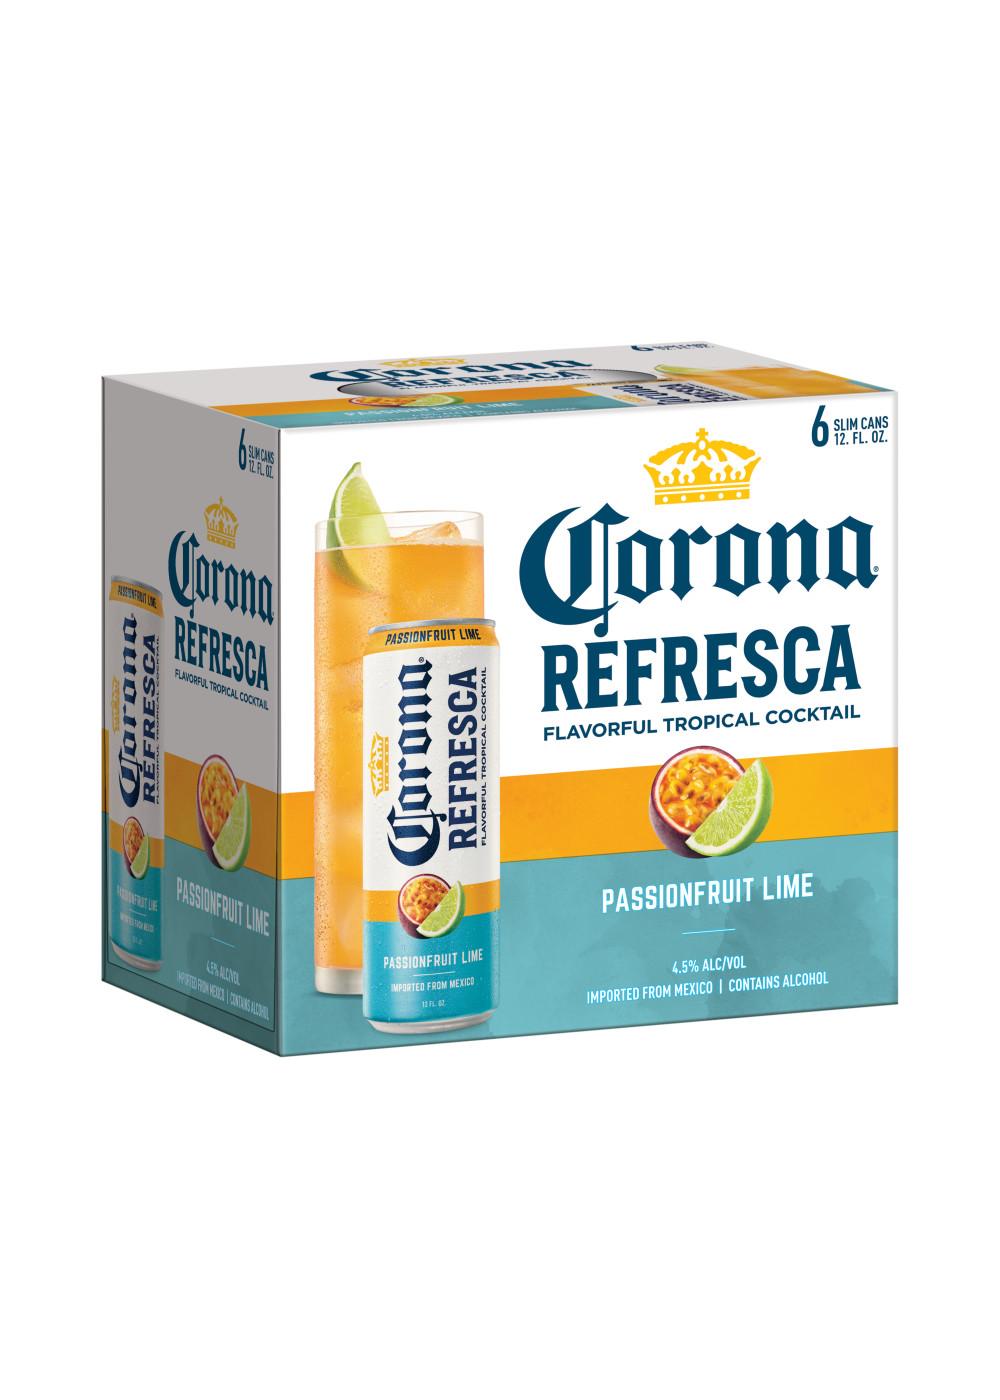 Corona Refresca Passionfruit Lime Spiked Tropical Cocktail 6 pk Cans; image 1 of 3